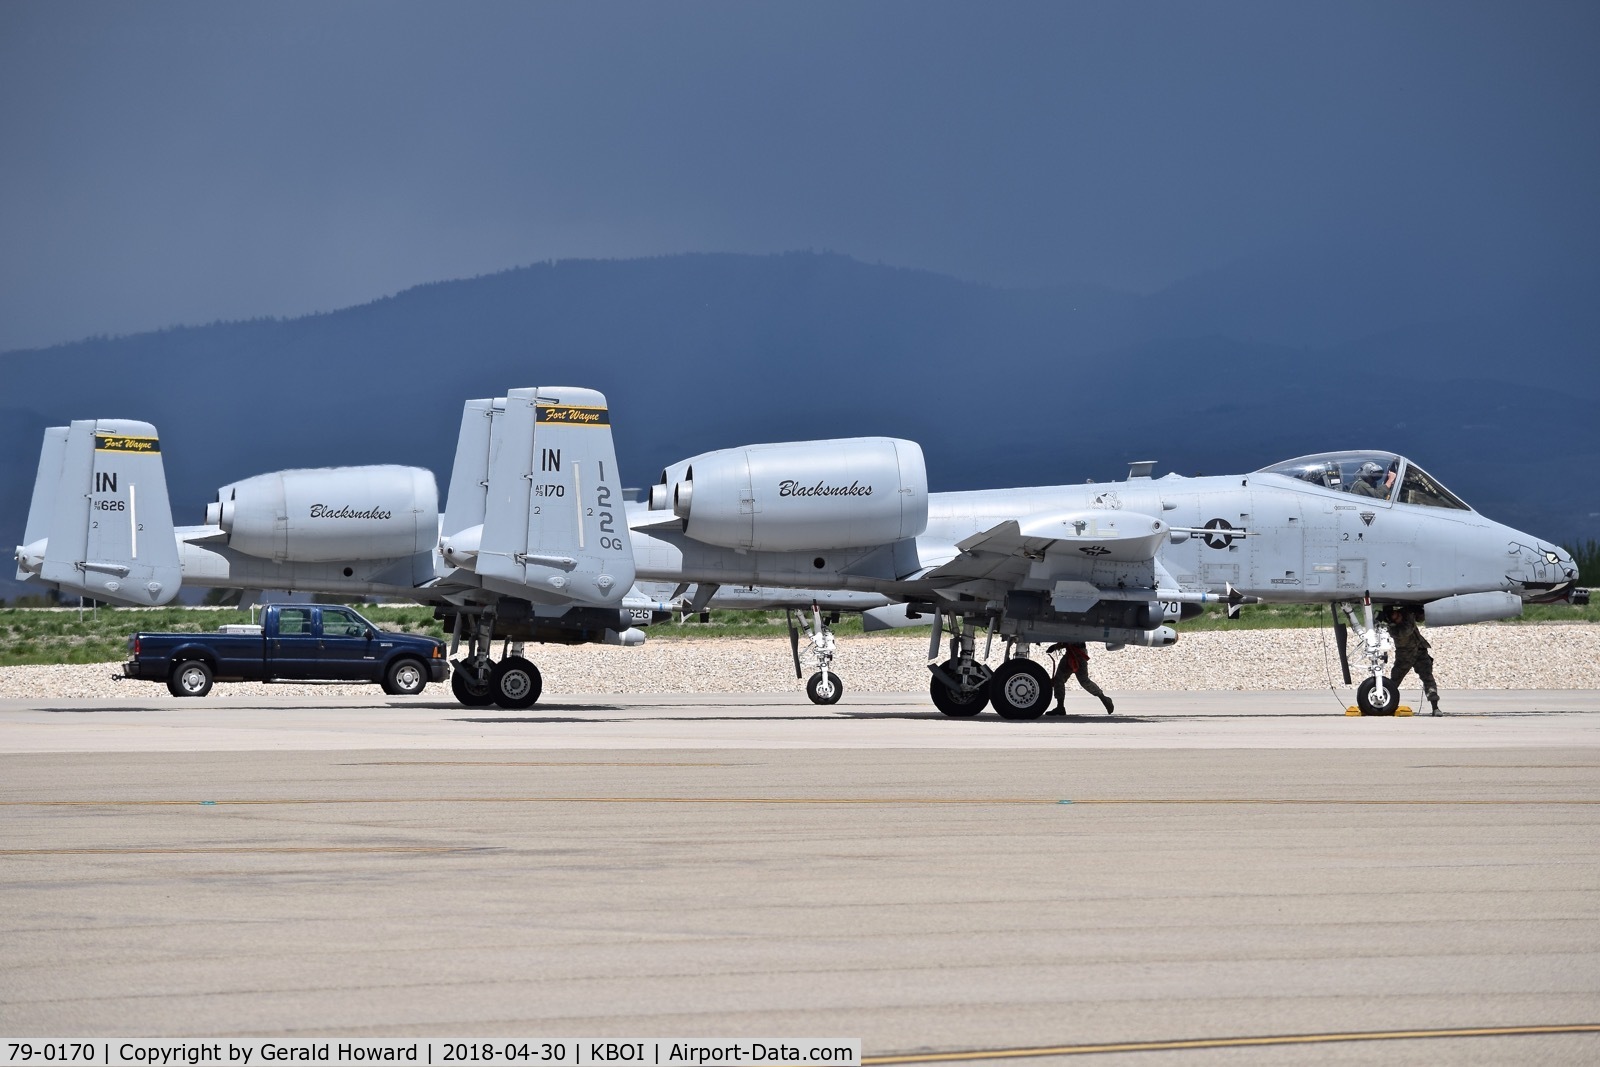 79-0170, 1979 Fairchild Republic A-10C Thunderbolt II C/N A10-0434, Two A-10Cs from the 163rd Fighter Sq. “Blacksnakes”, 122nd Fighter Wing, Fort Wayne, IN ANG on the de arm ramp.